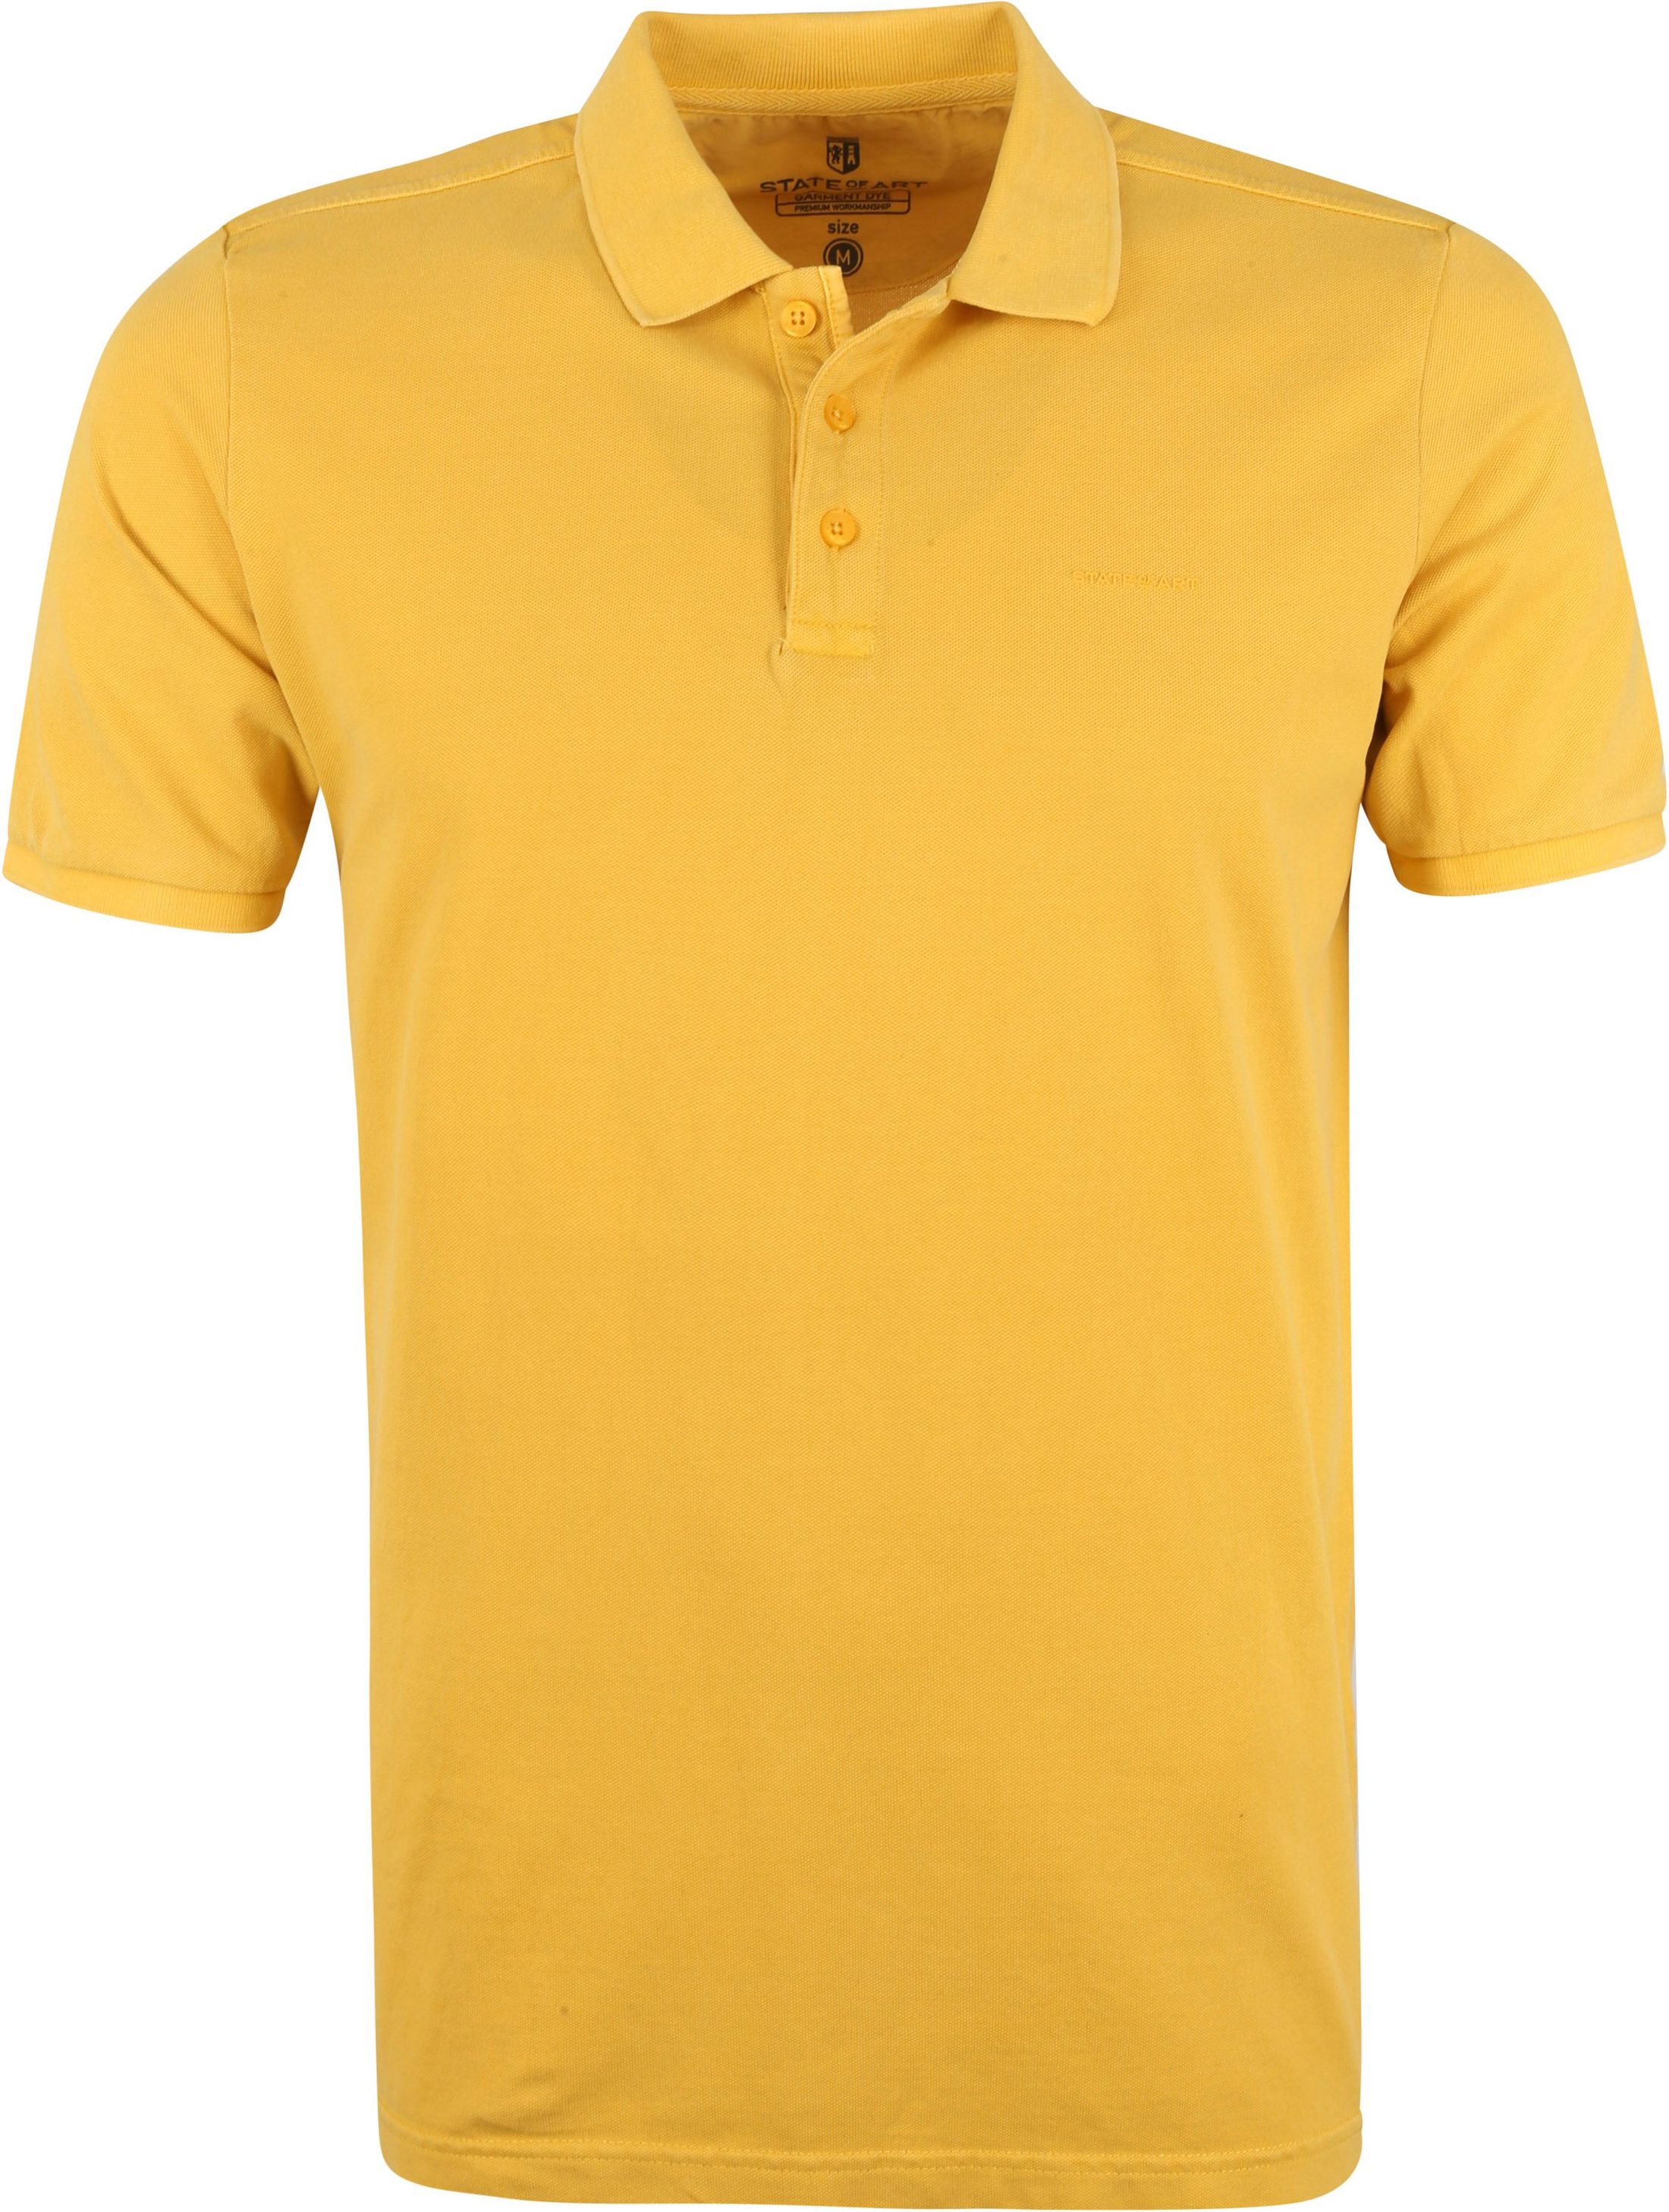 State Of Art Pique Polo Shirt Yellow size 3XL